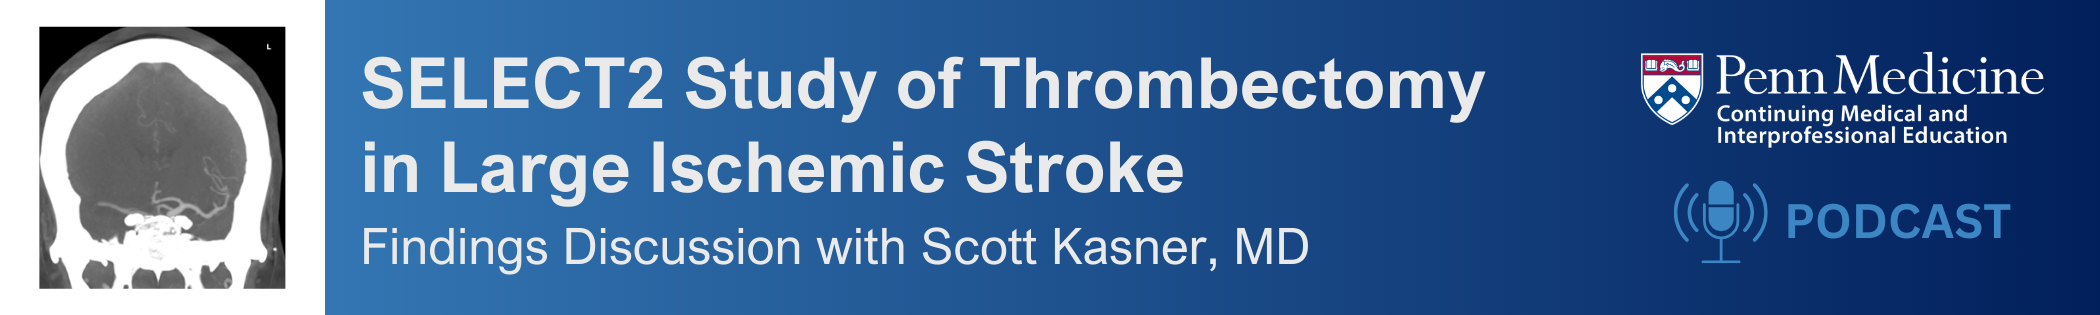 SELECT2 Study CME Podcast with Dr. Kasner Banner